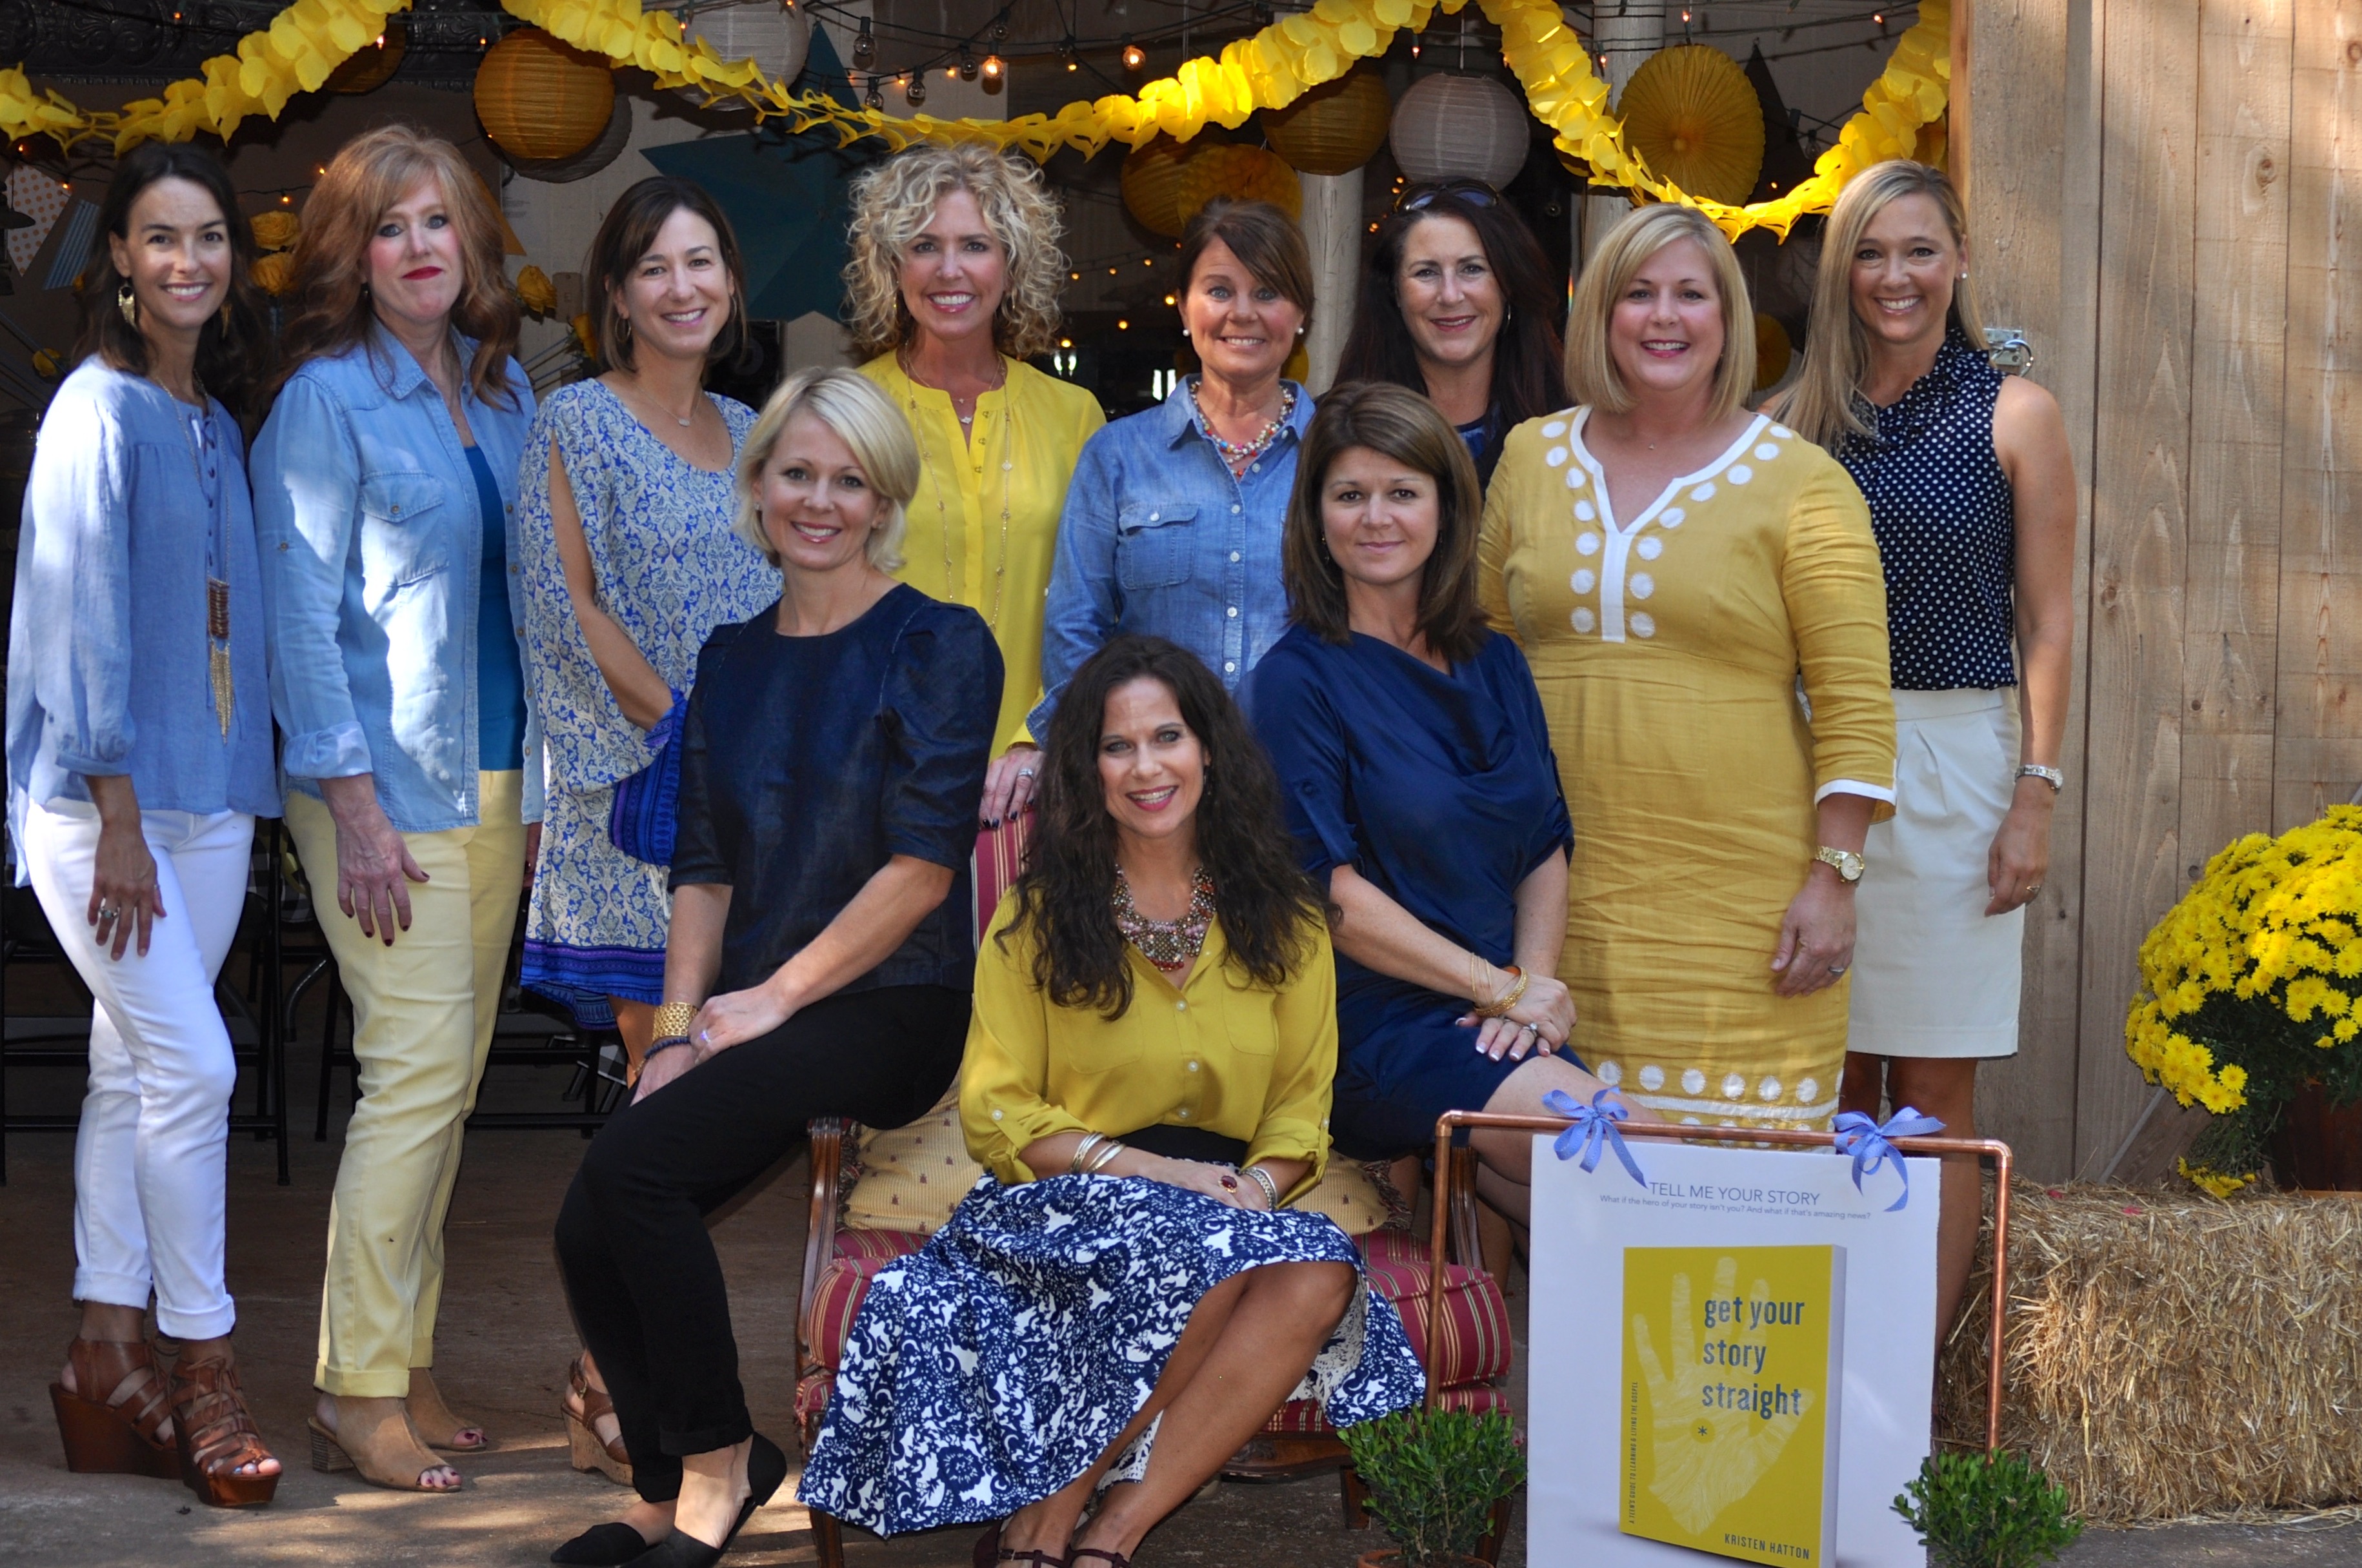 These Edmond, Oklahoma ladies outdid themselves with the best book launch barn party I could've imagined!